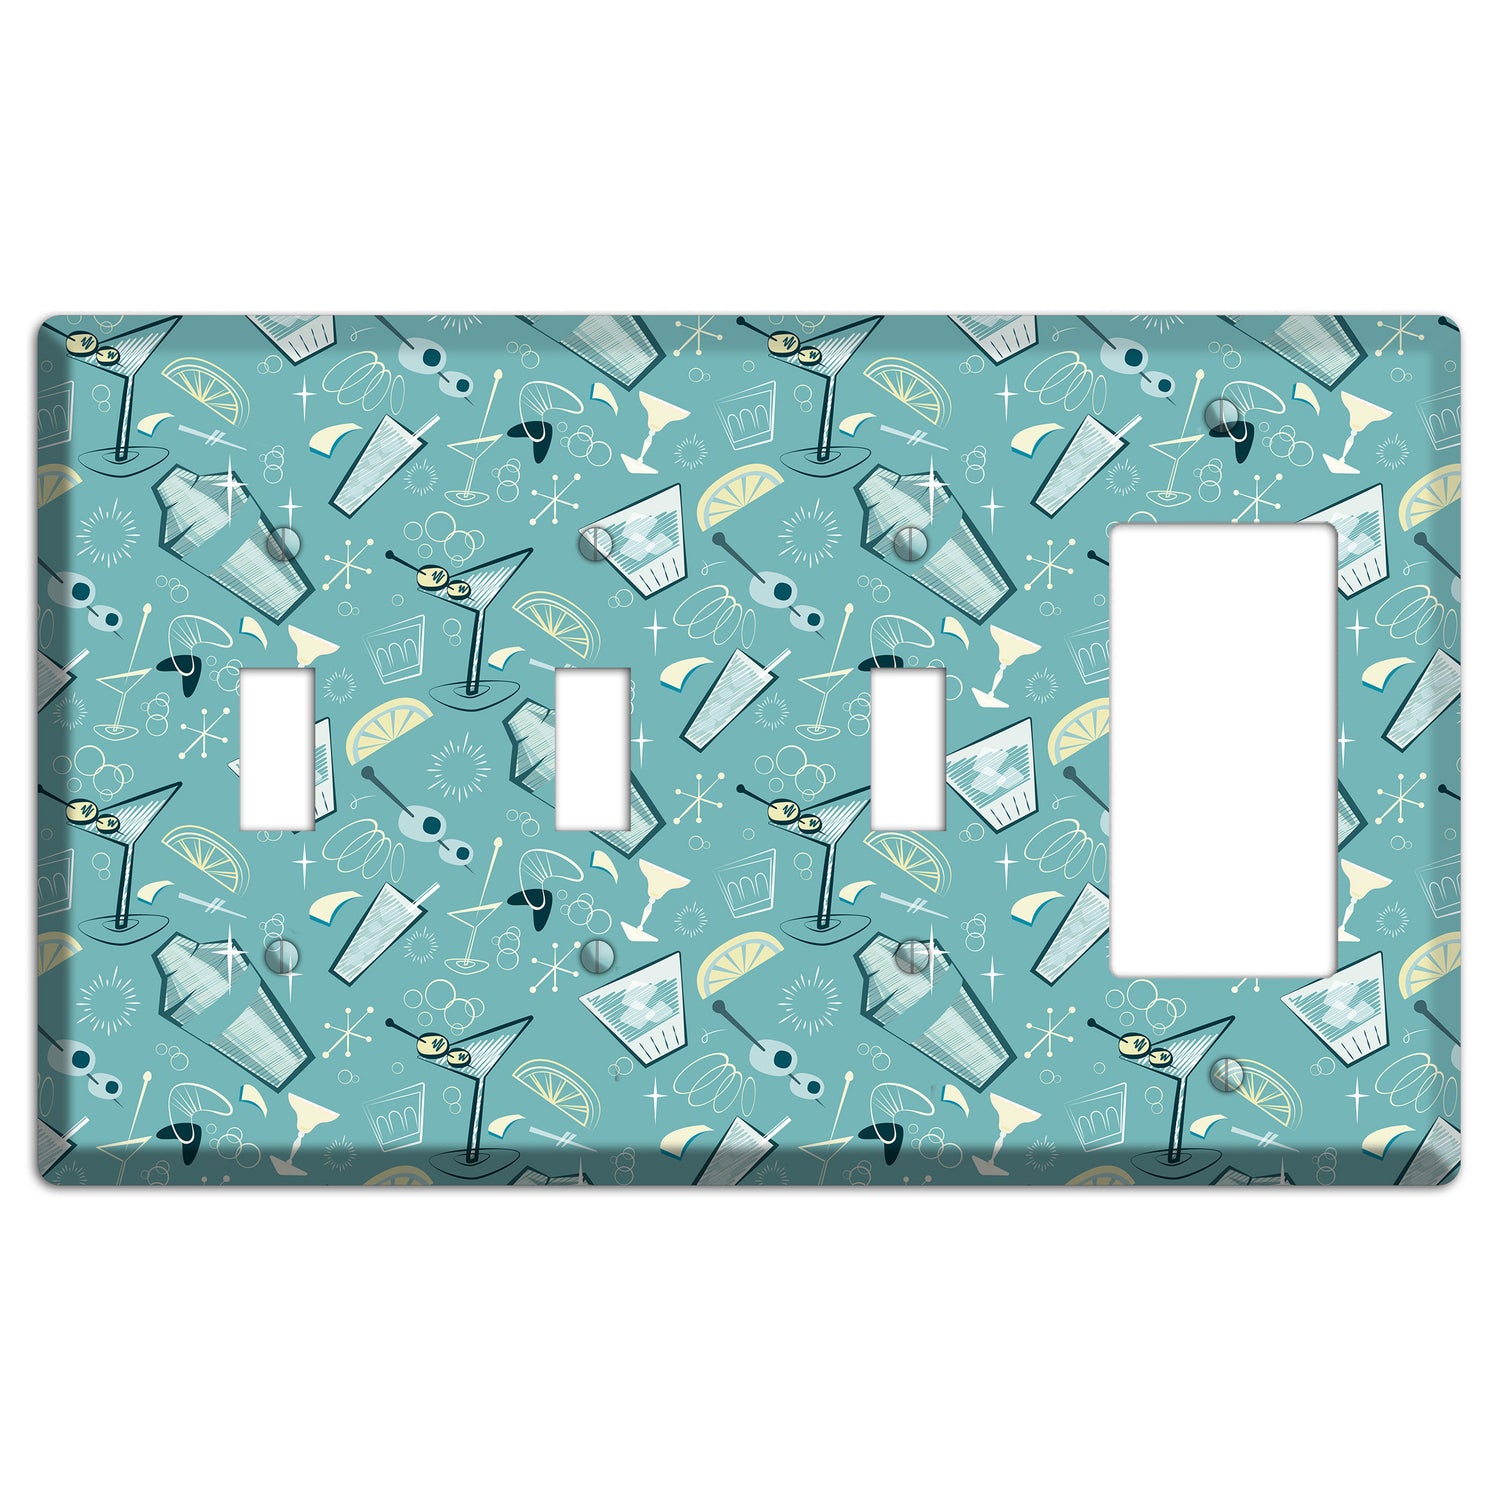 Retro Cocktails Teal 3 Toggle / Rocker Wallplate